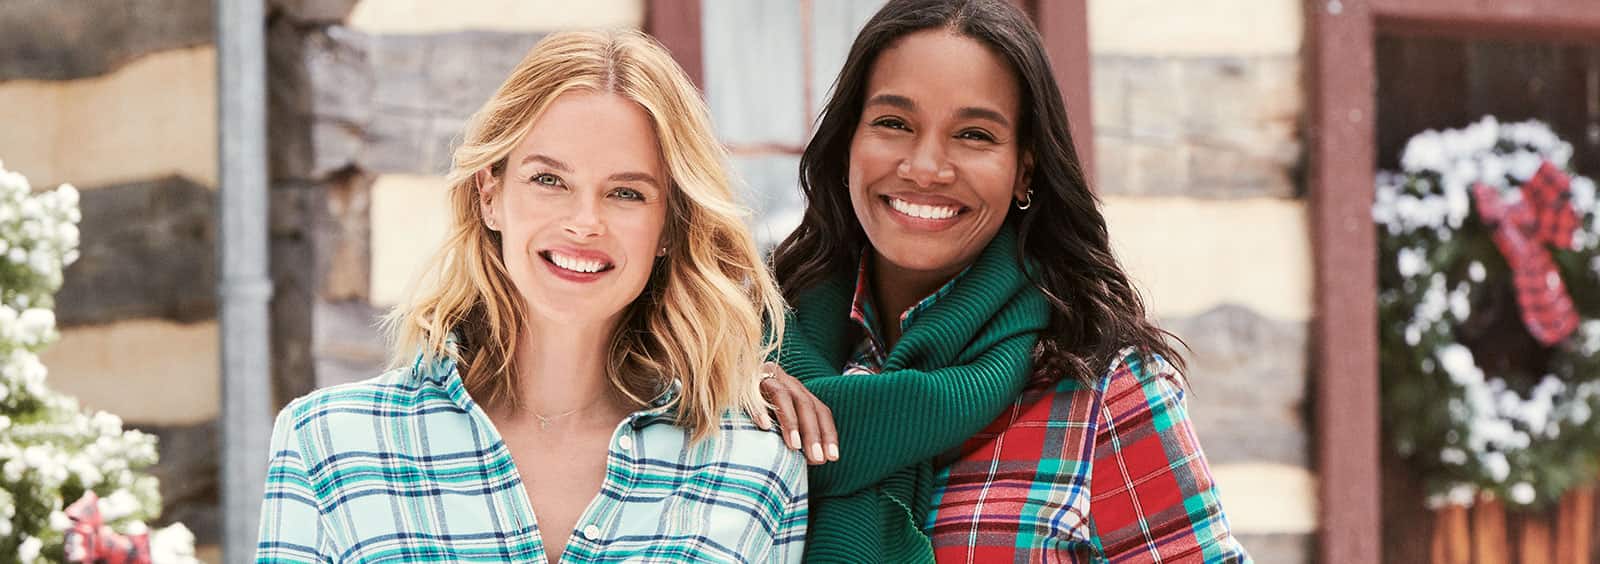 Here’s Why Flannel Shirts Will Always Be in Style | Lands' End